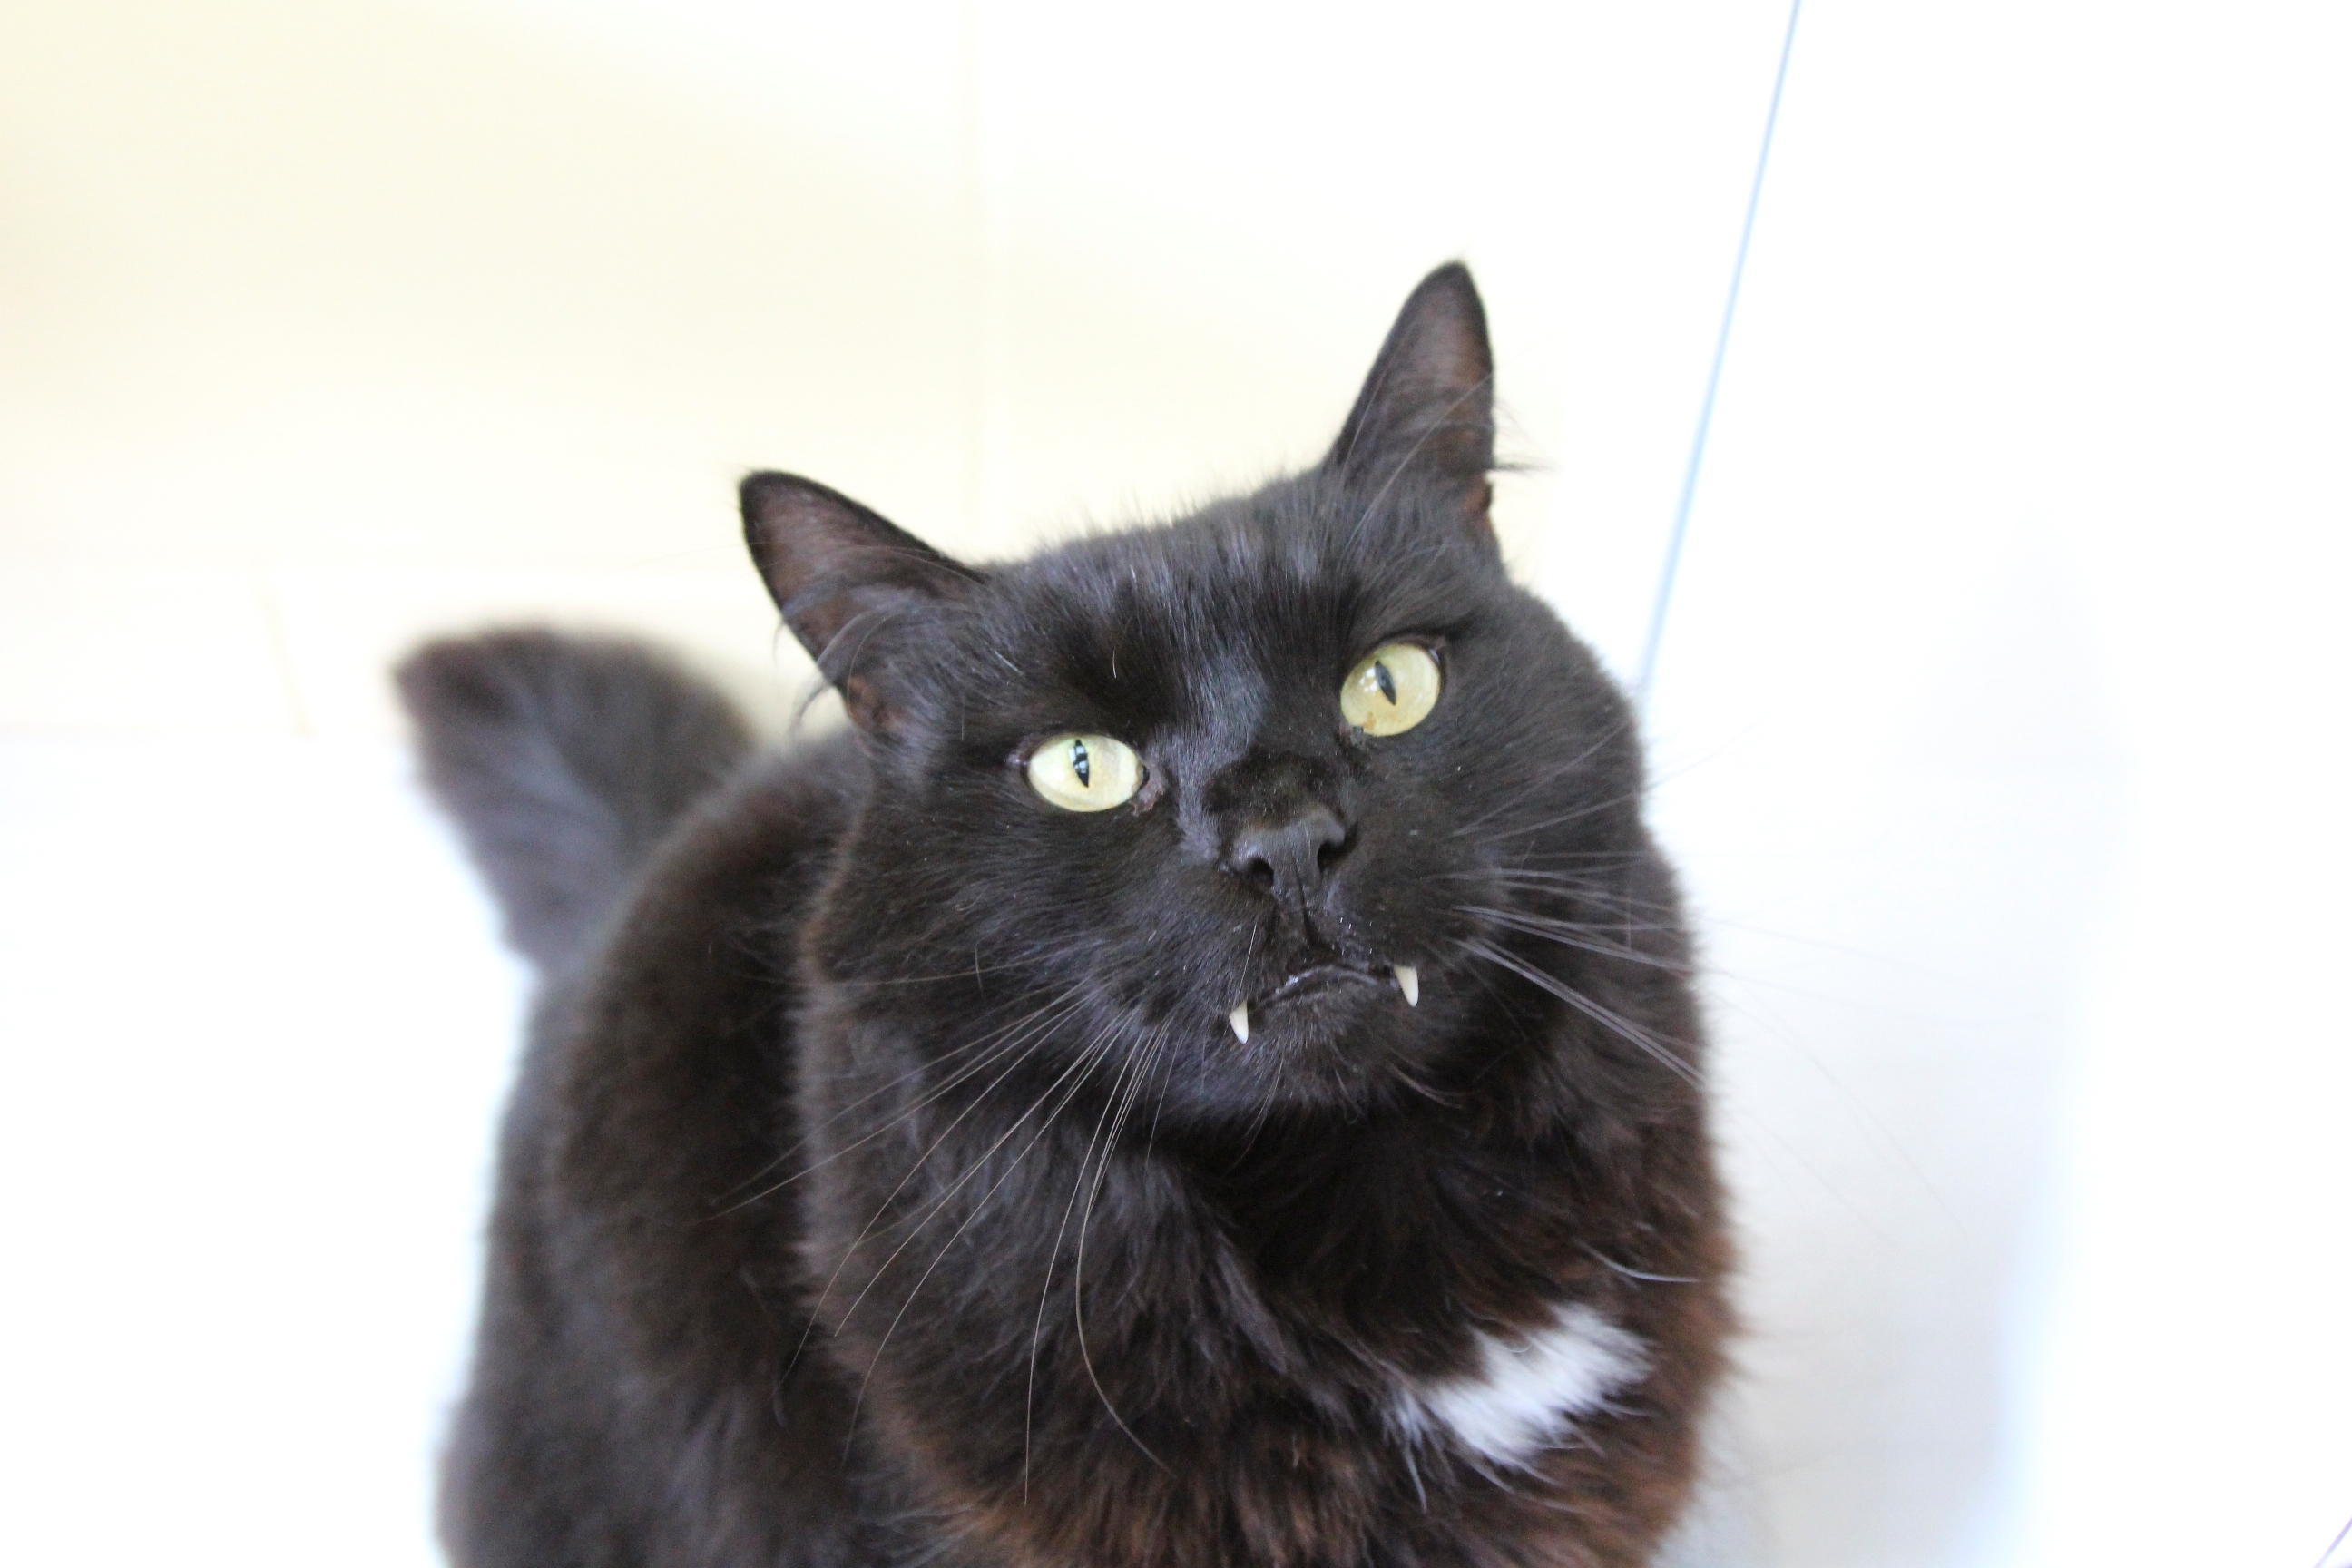 Photo of Timmy, a black cat with large, protruding canine teeth